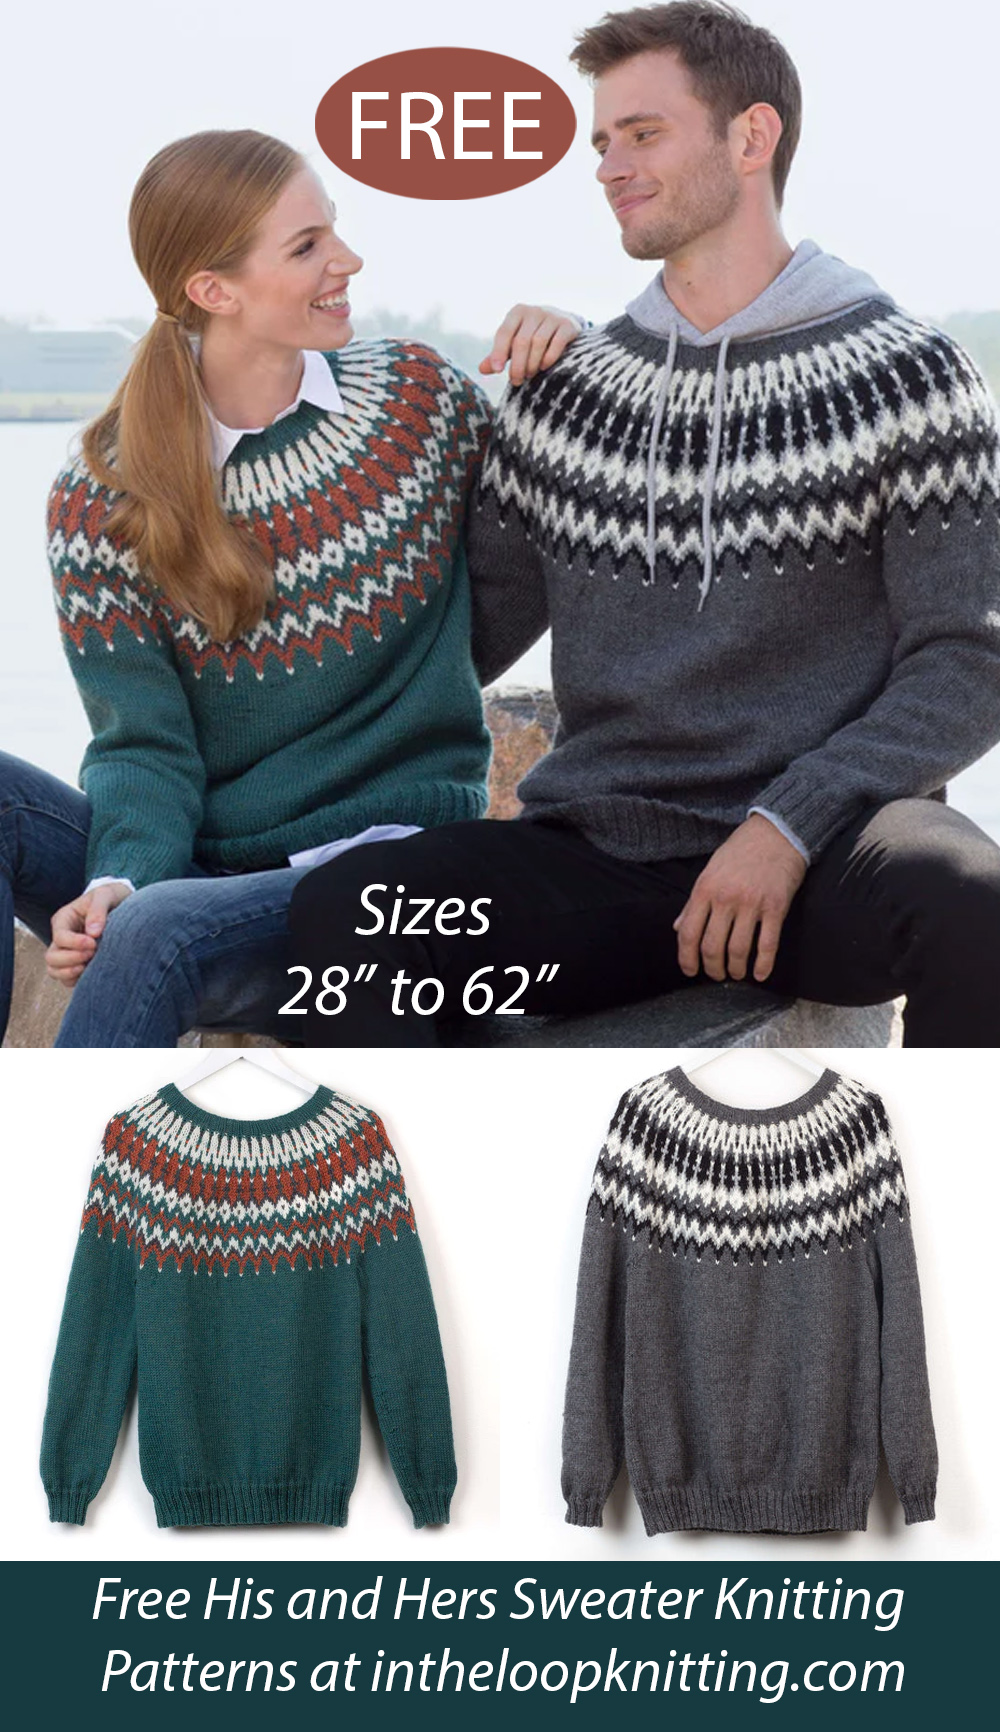 Free His And Hers Yoke Sweaters Knitting Pattern for Men and Women